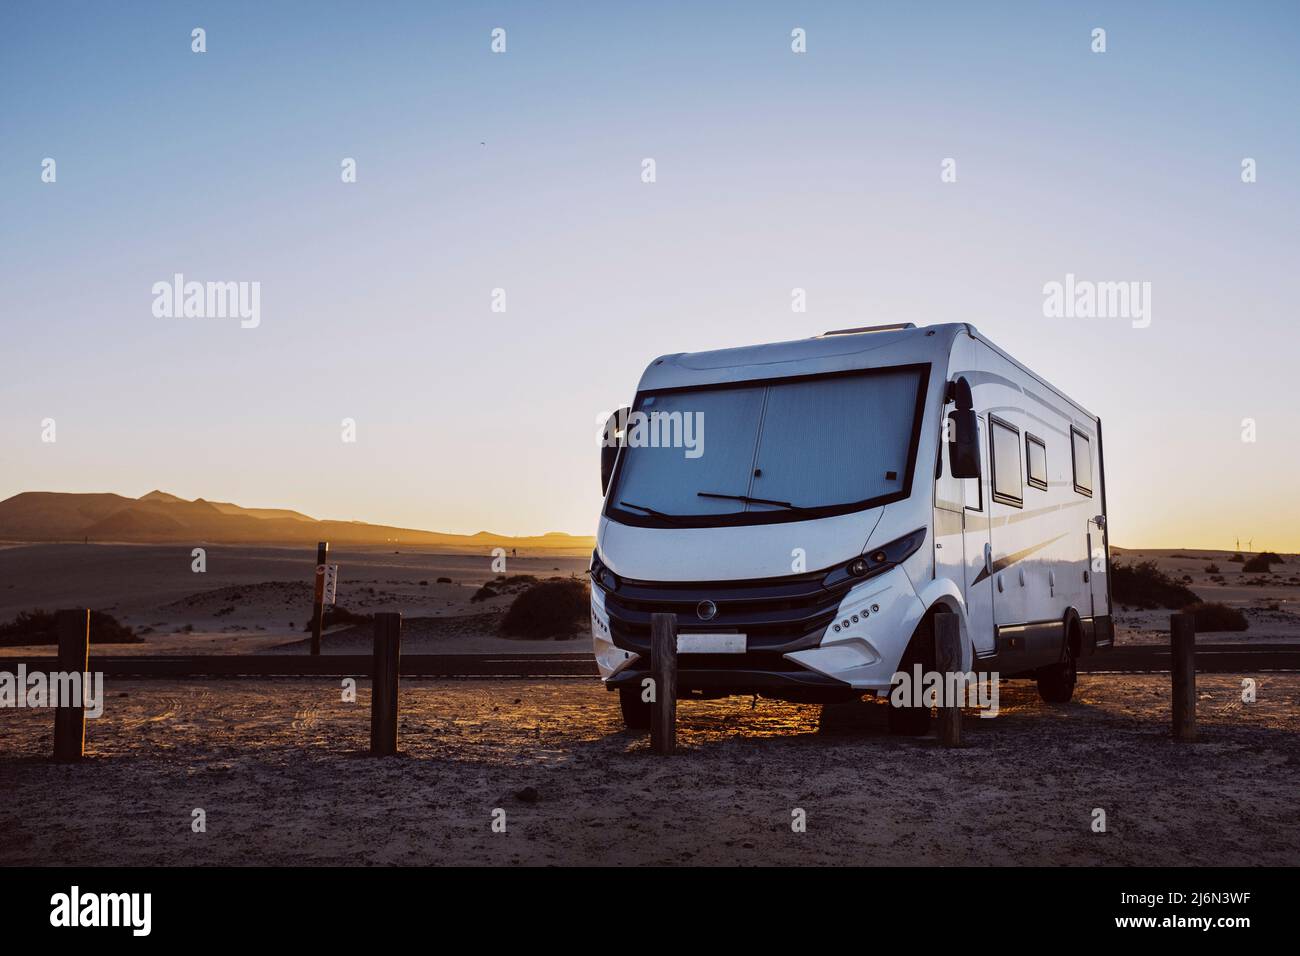 Big motorhome camper parked off road with desert and blue sky in background. Travel lifestyle camping car and freedom. Van against sunlight parked Stock Photo